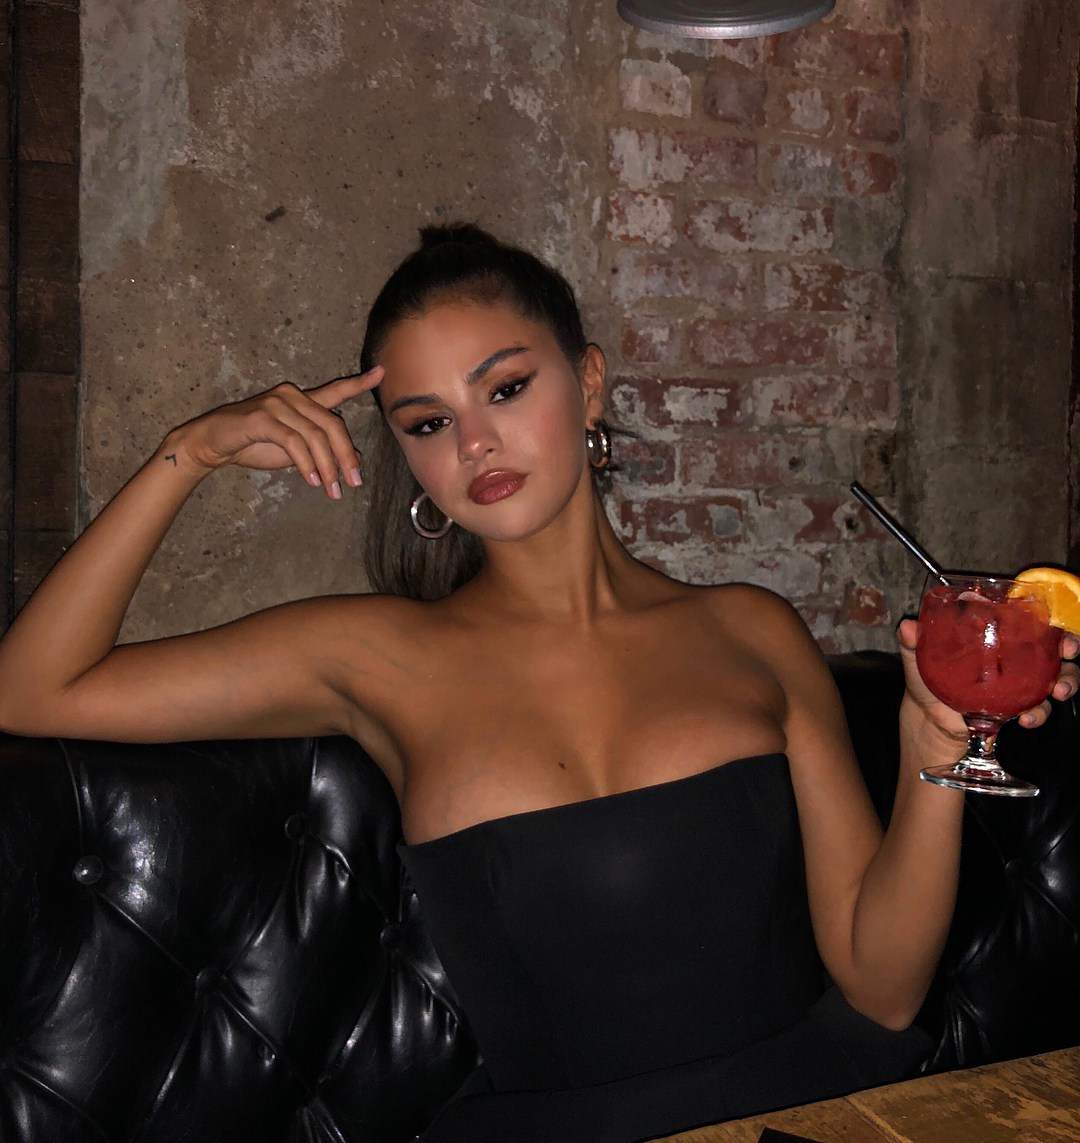 Singer, Selena Gomez puts busts on display in strapless little black dress (Photos)